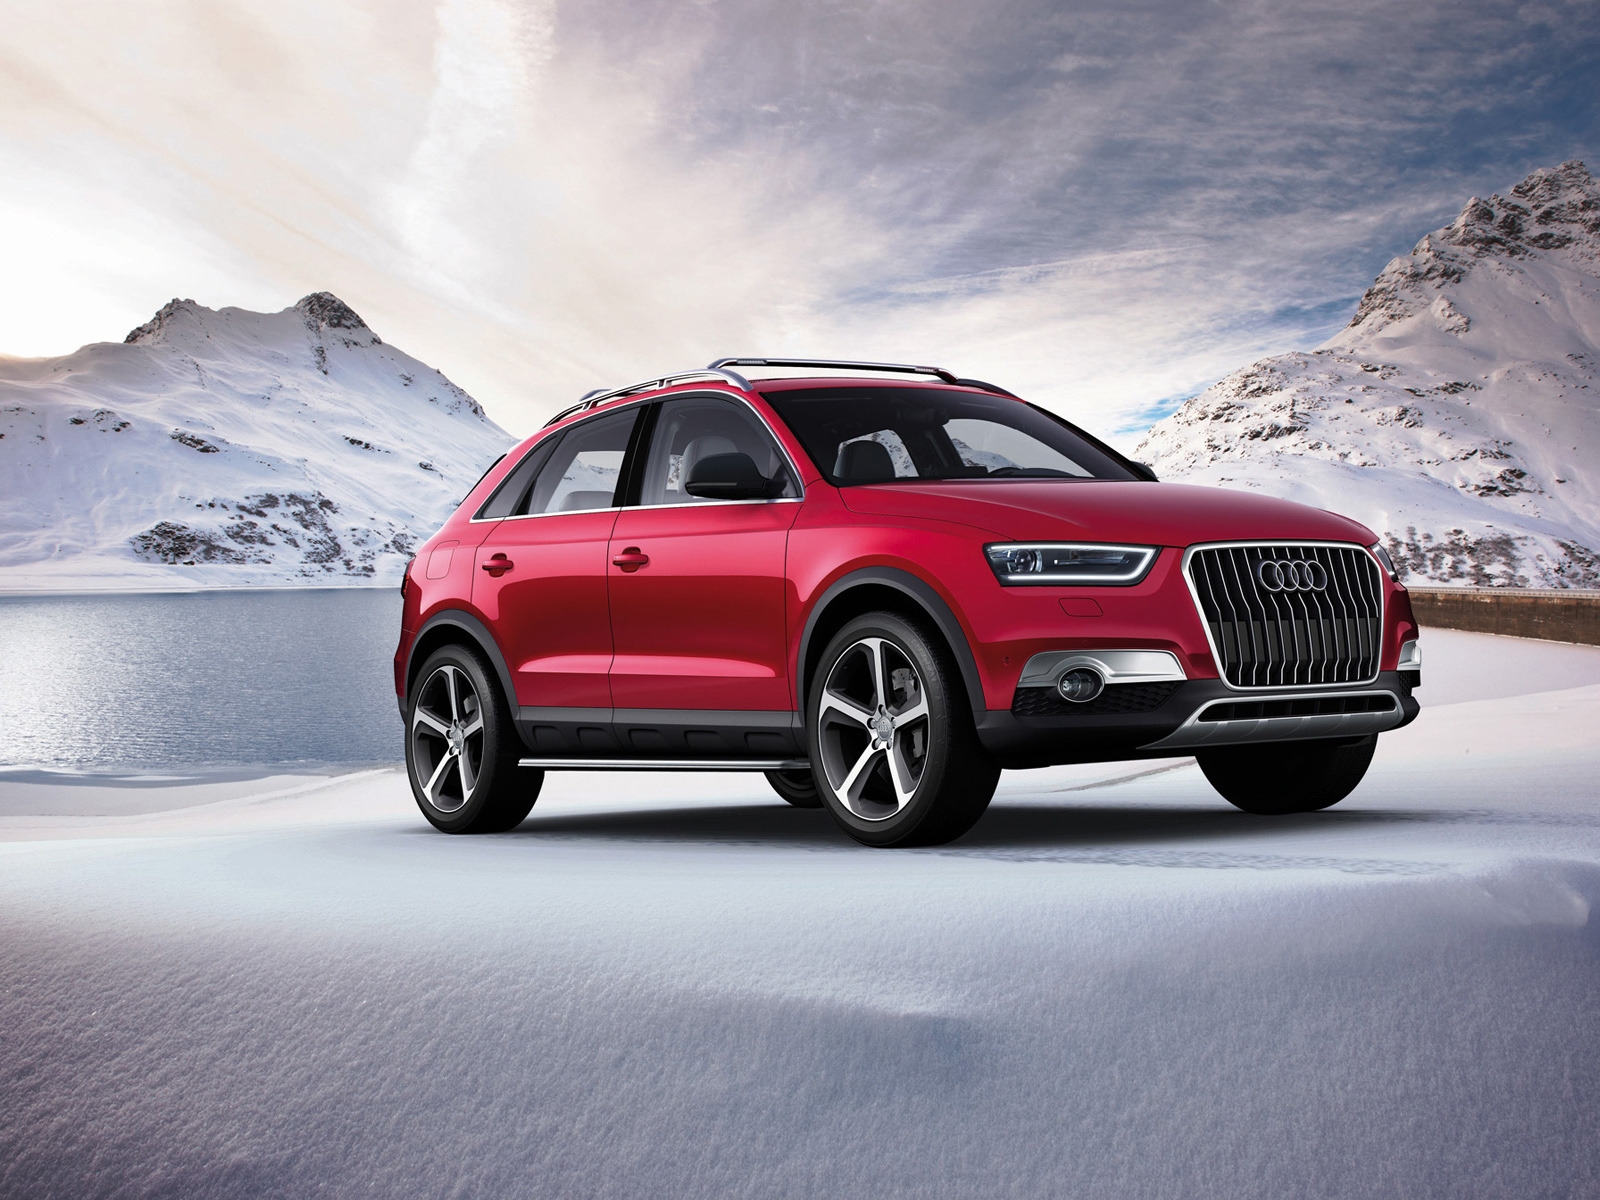 2012 Audi Q3 Vail for 1600 x 1200 resolution